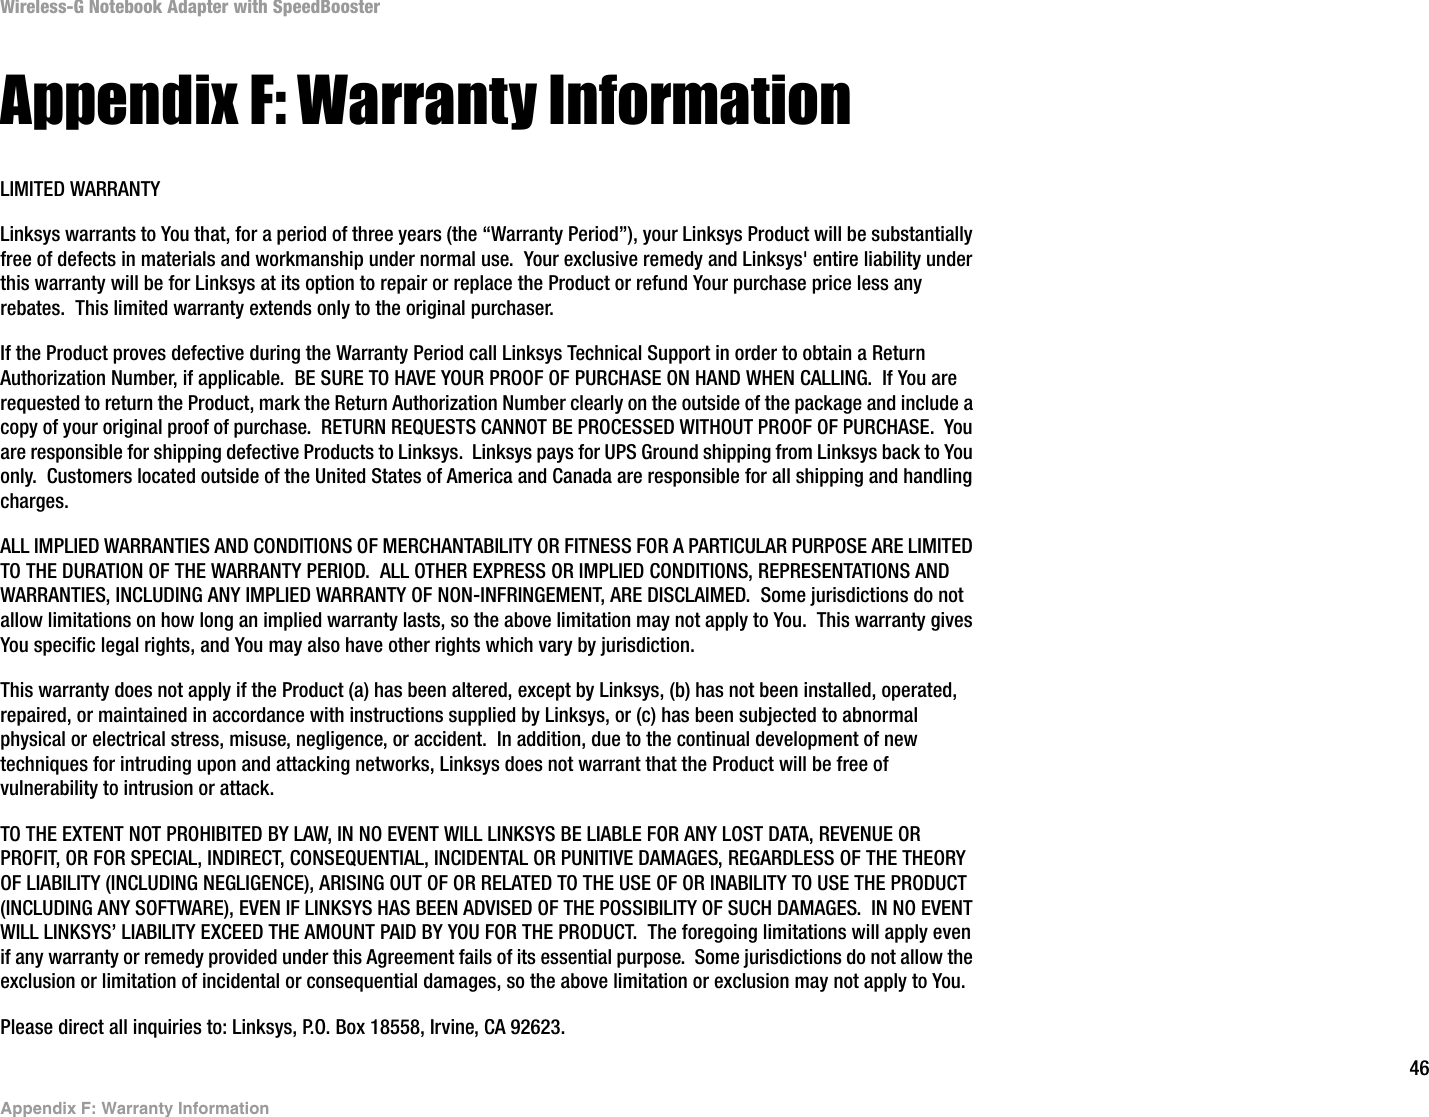 46Appendix F: Warranty InformationWireless-G Notebook Adapter with SpeedBoosterAppendix F: Warranty InformationLIMITED WARRANTYLinksys warrants to You that, for a period of three years (the “Warranty Period”), your Linksys Product will be substantially free of defects in materials and workmanship under normal use.  Your exclusive remedy and Linksys&apos; entire liability under this warranty will be for Linksys at its option to repair or replace the Product or refund Your purchase price less any rebates.  This limited warranty extends only to the original purchaser.  If the Product proves defective during the Warranty Period call Linksys Technical Support in order to obtain a Return Authorization Number, if applicable.  BE SURE TO HAVE YOUR PROOF OF PURCHASE ON HAND WHEN CALLING.  If You are requested to return the Product, mark the Return Authorization Number clearly on the outside of the package and include a copy of your original proof of purchase.  RETURN REQUESTS CANNOT BE PROCESSED WITHOUT PROOF OF PURCHASE.  You are responsible for shipping defective Products to Linksys.  Linksys pays for UPS Ground shipping from Linksys back to You only.  Customers located outside of the United States of America and Canada are responsible for all shipping and handling charges. ALL IMPLIED WARRANTIES AND CONDITIONS OF MERCHANTABILITY OR FITNESS FOR A PARTICULAR PURPOSE ARE LIMITED TO THE DURATION OF THE WARRANTY PERIOD.  ALL OTHER EXPRESS OR IMPLIED CONDITIONS, REPRESENTATIONS AND WARRANTIES, INCLUDING ANY IMPLIED WARRANTY OF NON-INFRINGEMENT, ARE DISCLAIMED.  Some jurisdictions do not allow limitations on how long an implied warranty lasts, so the above limitation may not apply to You.  This warranty gives You specific legal rights, and You may also have other rights which vary by jurisdiction.This warranty does not apply if the Product (a) has been altered, except by Linksys, (b) has not been installed, operated, repaired, or maintained in accordance with instructions supplied by Linksys, or (c) has been subjected to abnormal physical or electrical stress, misuse, negligence, or accident.  In addition, due to the continual development of new techniques for intruding upon and attacking networks, Linksys does not warrant that the Product will be free of vulnerability to intrusion or attack.TO THE EXTENT NOT PROHIBITED BY LAW, IN NO EVENT WILL LINKSYS BE LIABLE FOR ANY LOST DATA, REVENUE OR PROFIT, OR FOR SPECIAL, INDIRECT, CONSEQUENTIAL, INCIDENTAL OR PUNITIVE DAMAGES, REGARDLESS OF THE THEORY OF LIABILITY (INCLUDING NEGLIGENCE), ARISING OUT OF OR RELATED TO THE USE OF OR INABILITY TO USE THE PRODUCT (INCLUDING ANY SOFTWARE), EVEN IF LINKSYS HAS BEEN ADVISED OF THE POSSIBILITY OF SUCH DAMAGES.  IN NO EVENT WILL LINKSYS’ LIABILITY EXCEED THE AMOUNT PAID BY YOU FOR THE PRODUCT.  The foregoing limitations will apply even if any warranty or remedy provided under this Agreement fails of its essential purpose.  Some jurisdictions do not allow the exclusion or limitation of incidental or consequential damages, so the above limitation or exclusion may not apply to You.Please direct all inquiries to: Linksys, P.O. Box 18558, Irvine, CA 92623.